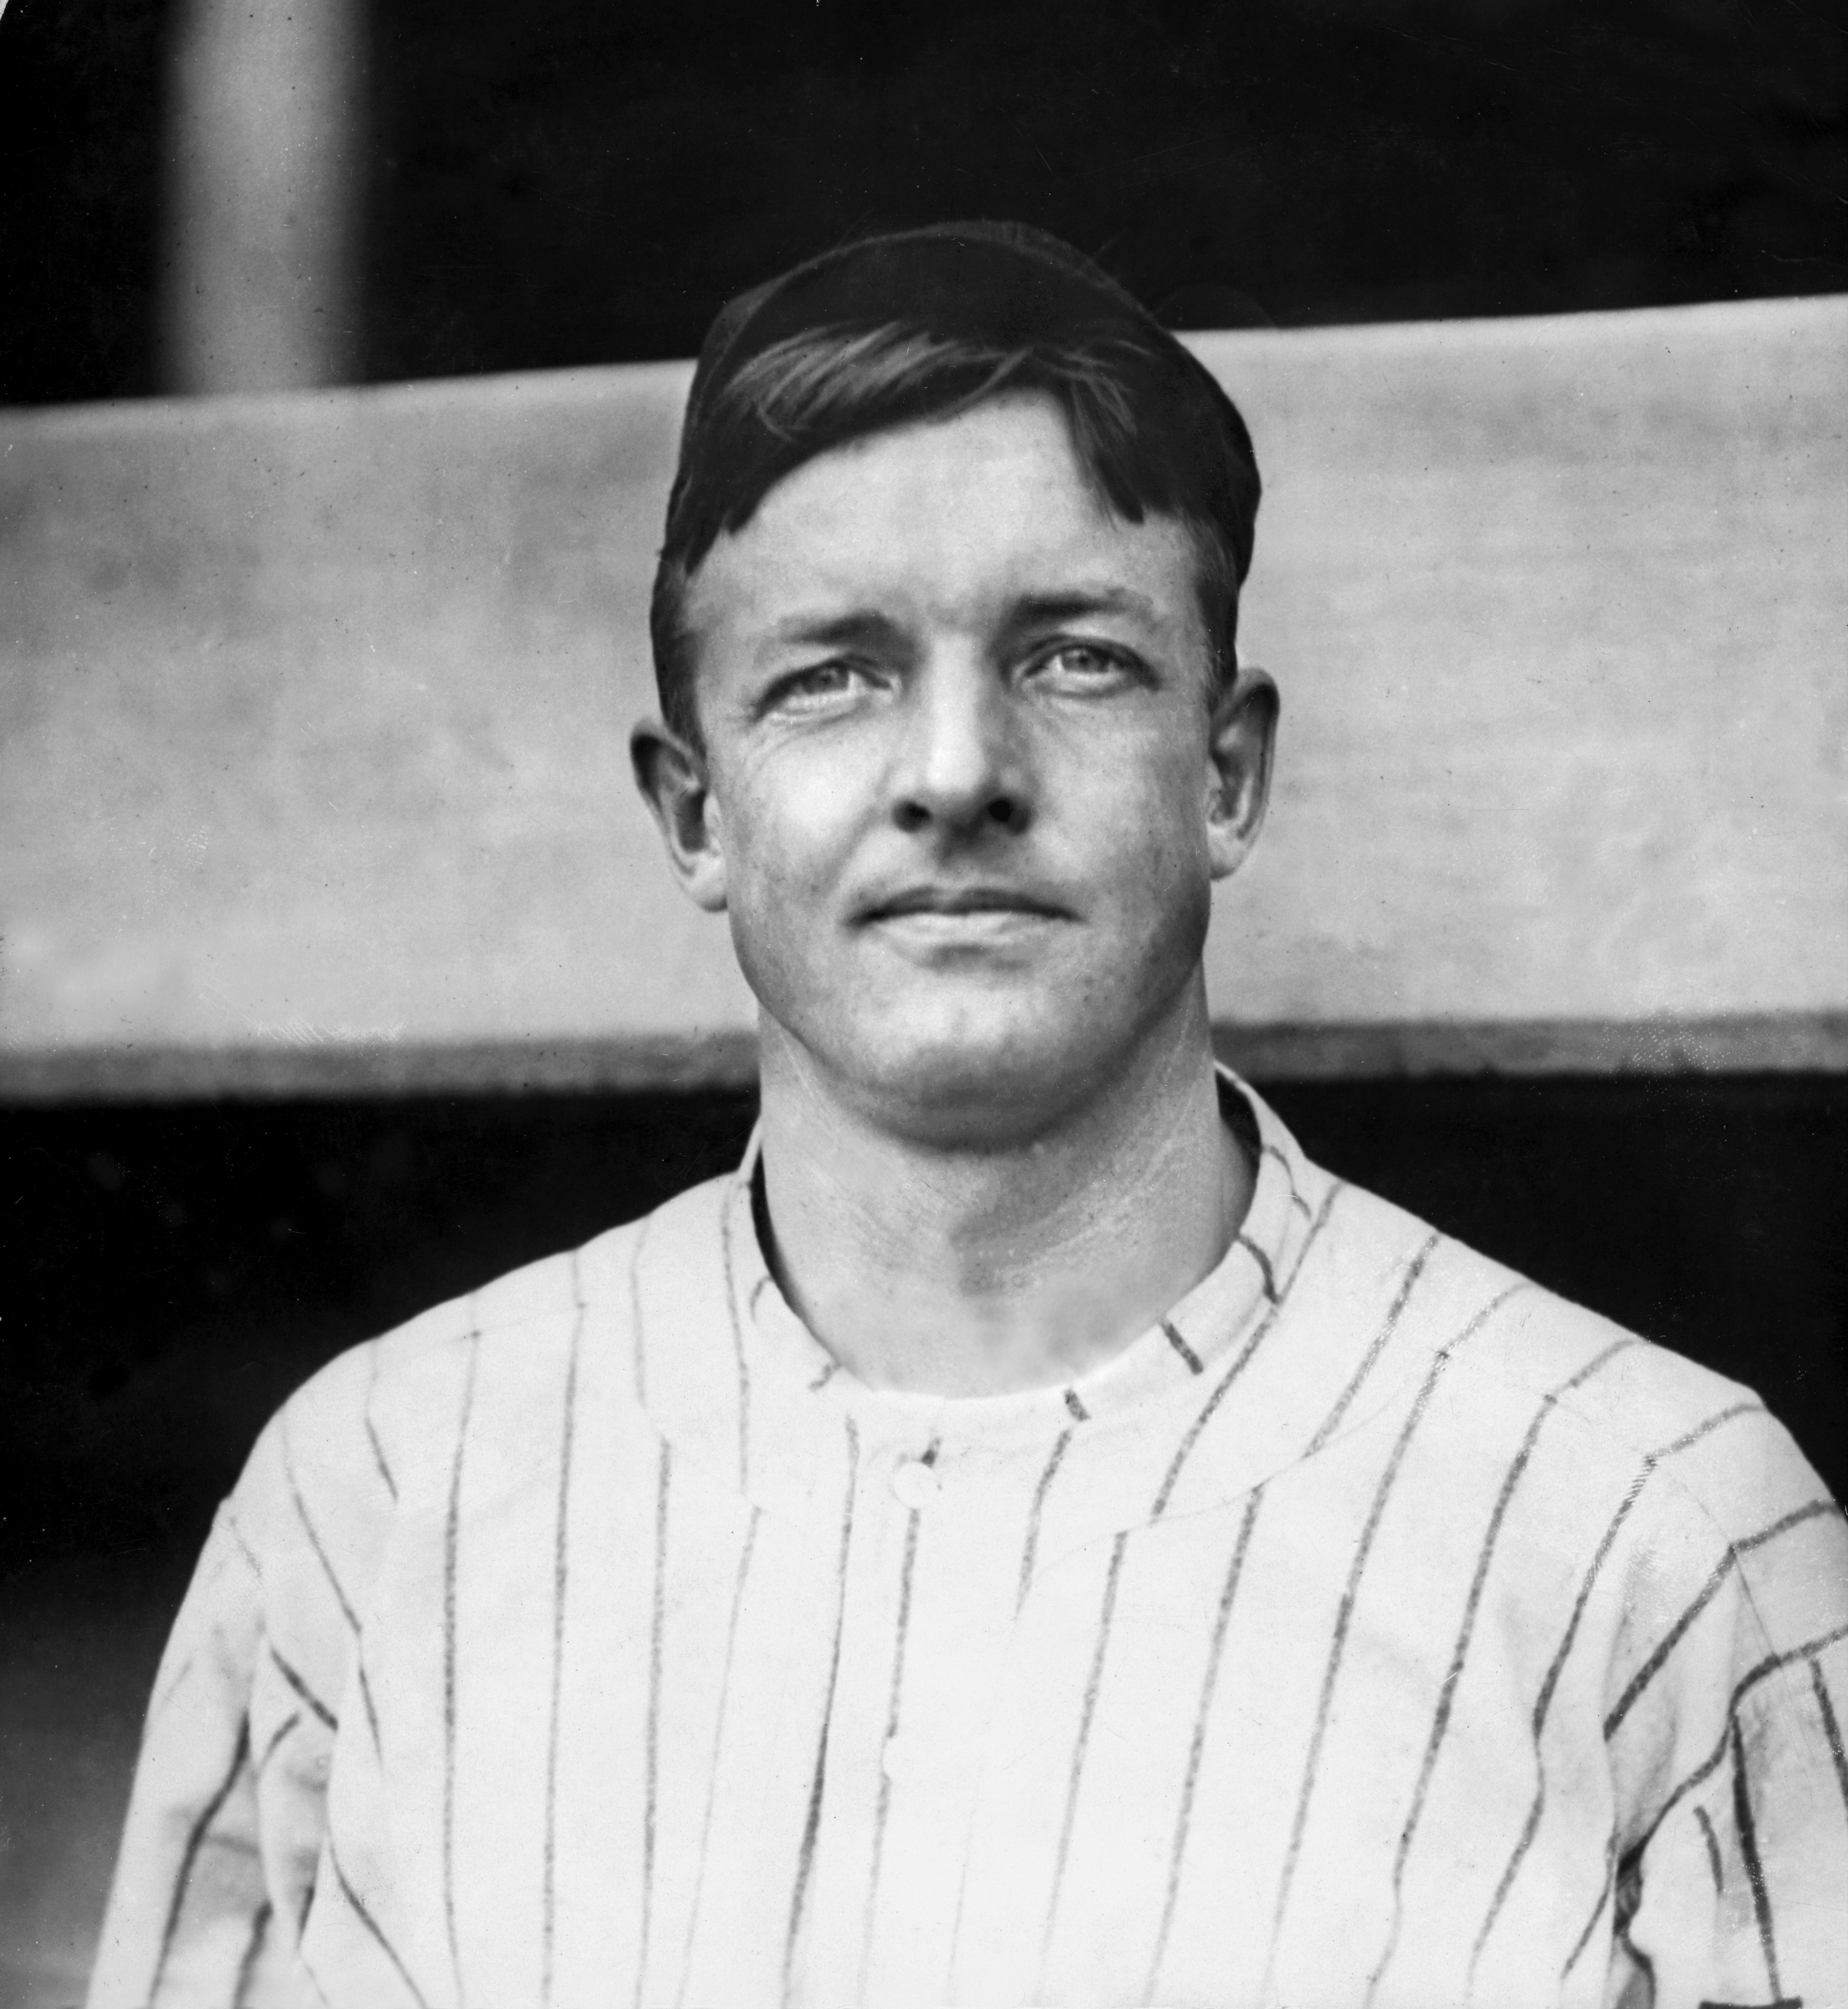 Giants changed history by trading for Mathewson